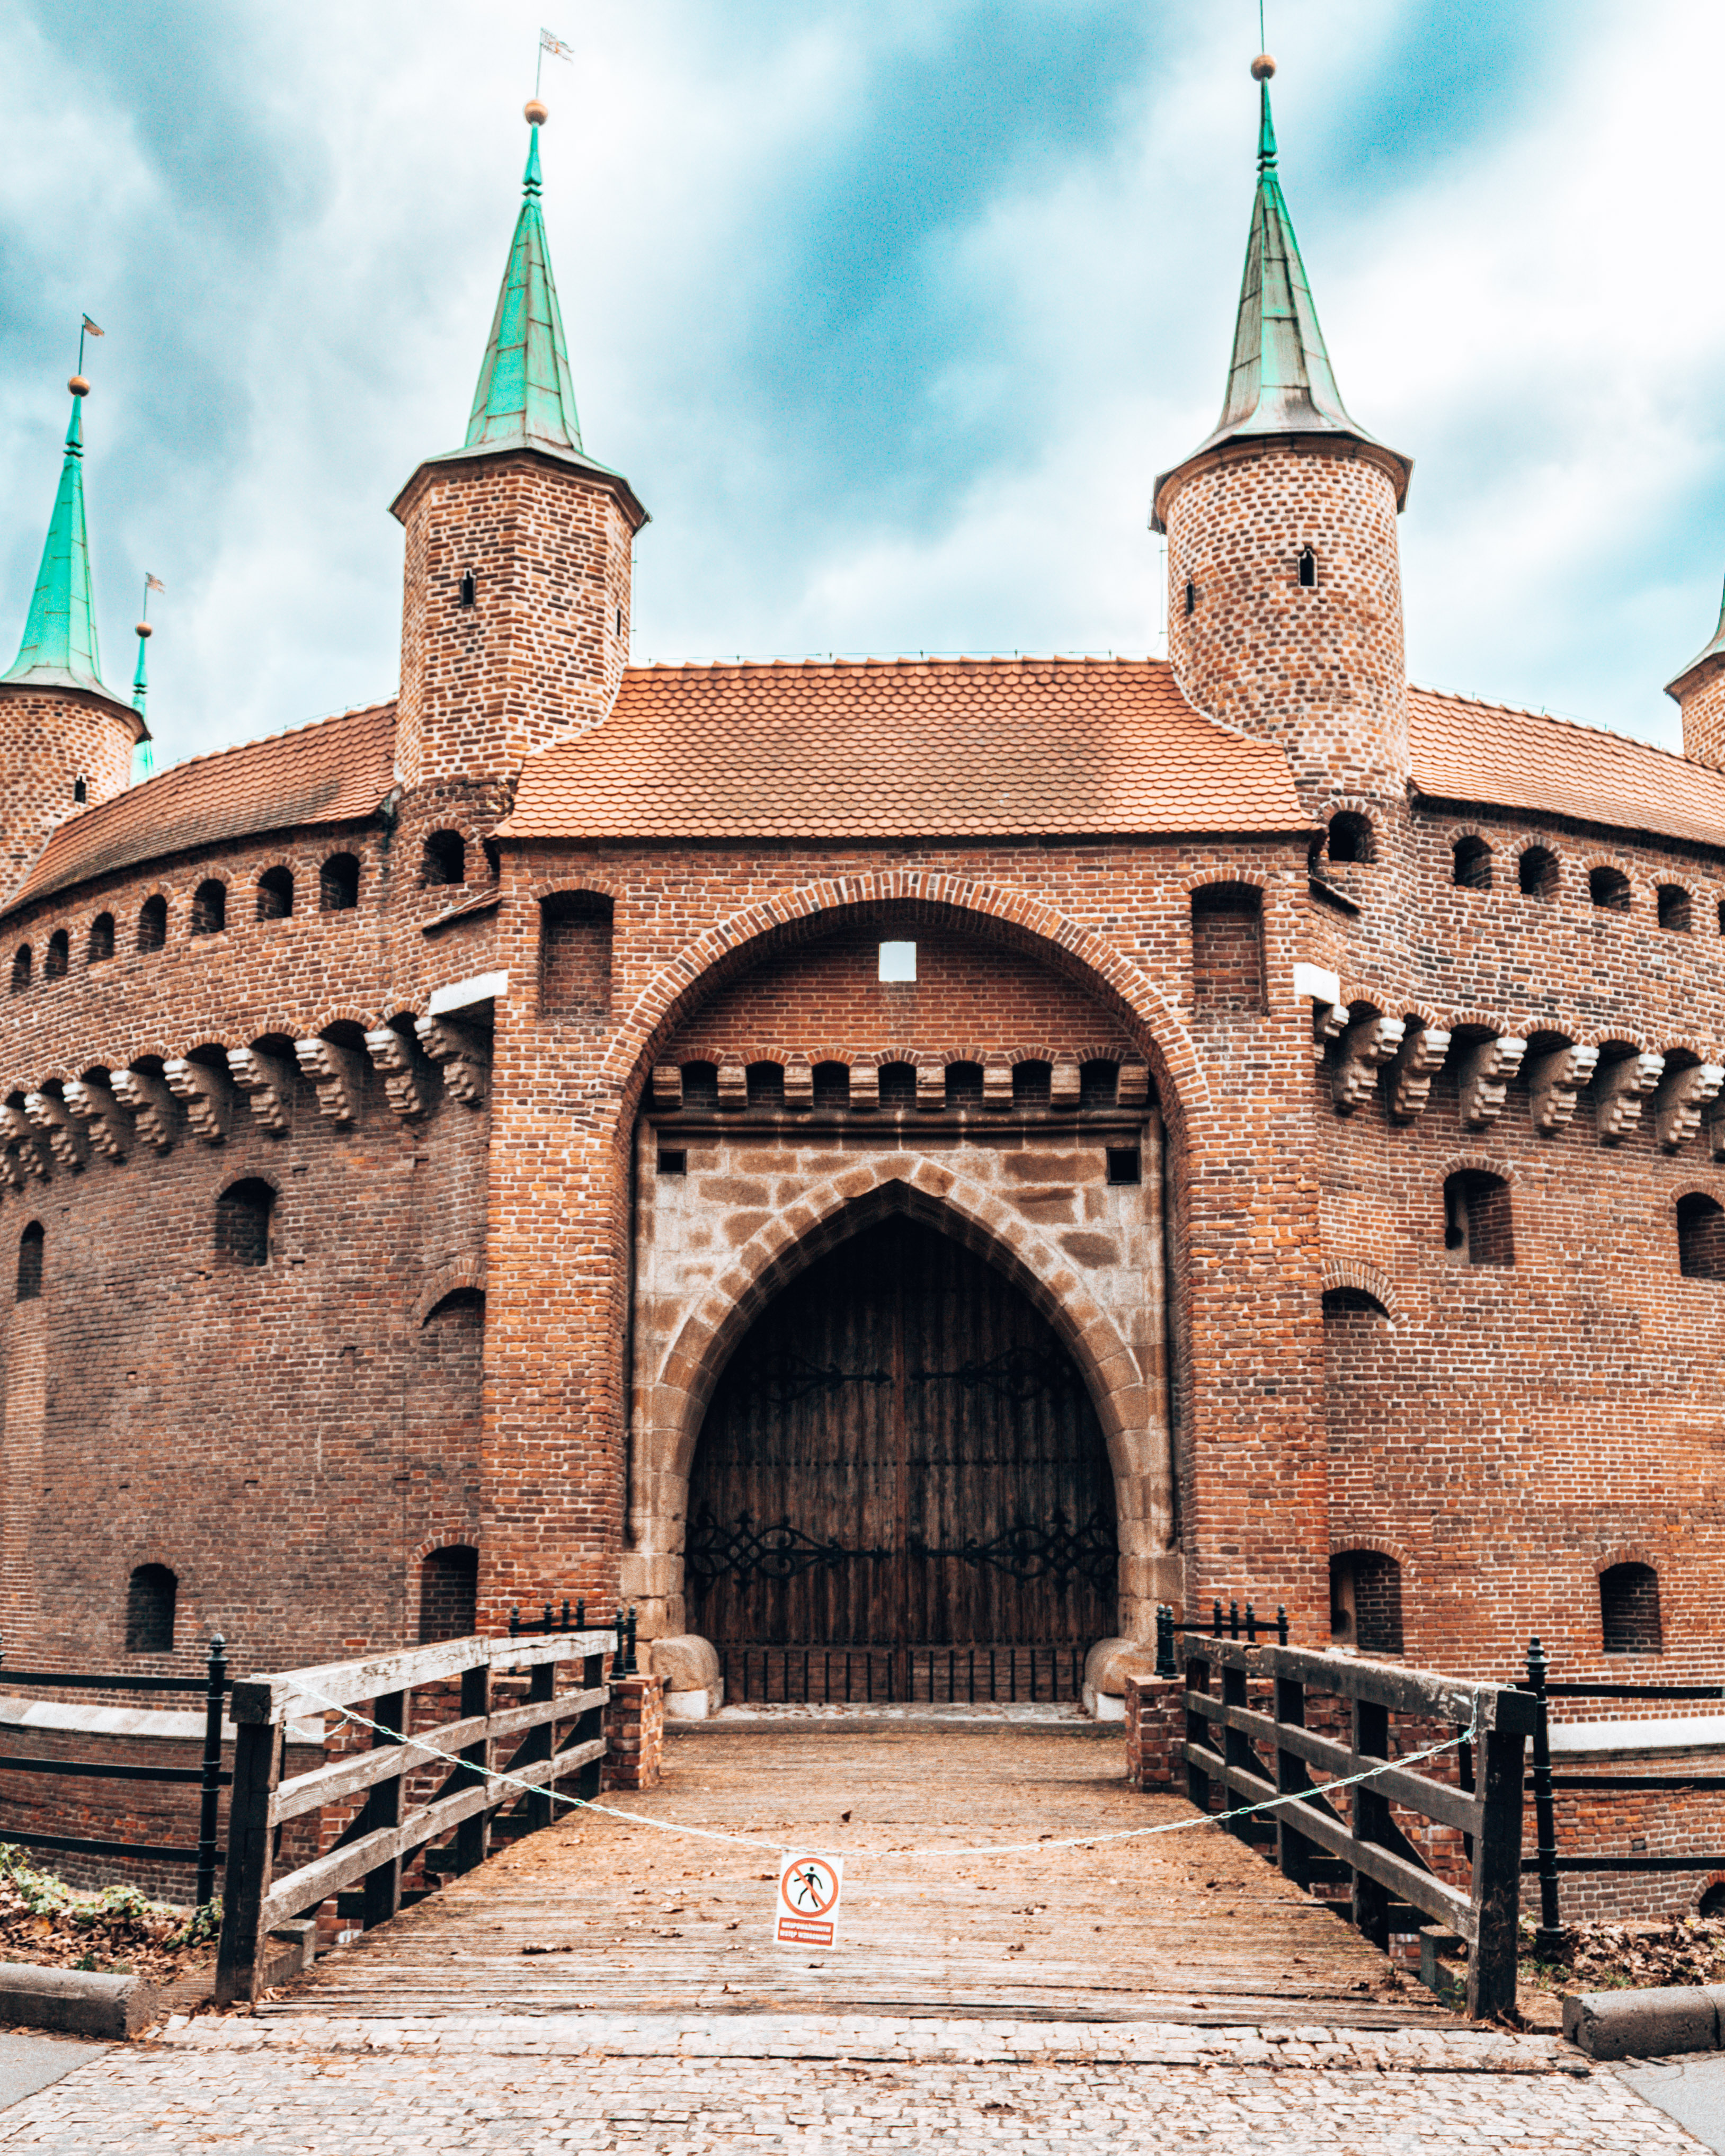 The Barbican fortress in the old town of Krakow, Poland